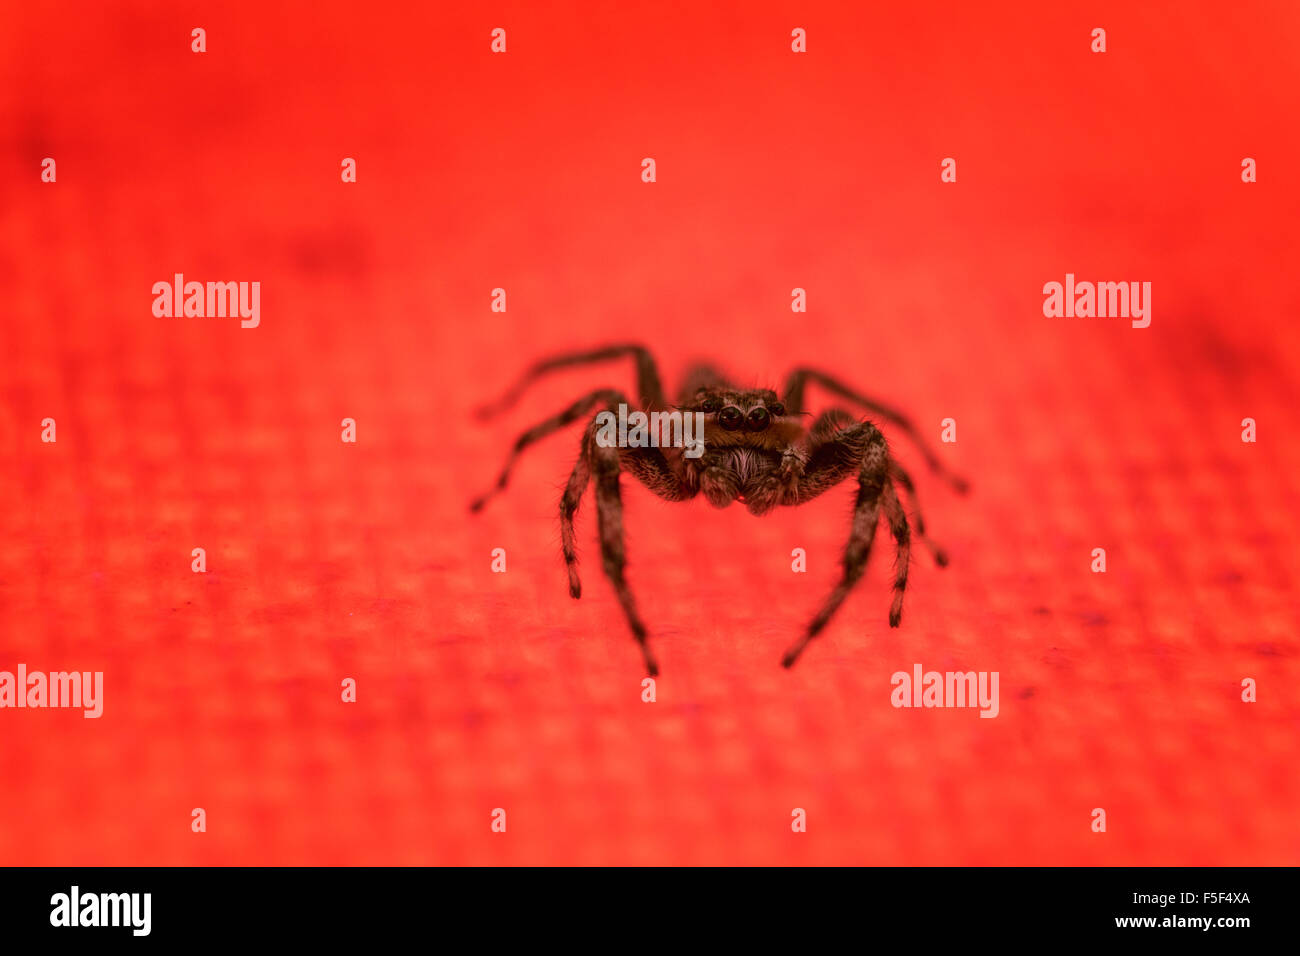 A jumping spider curiously staring at the camera Stock Photo